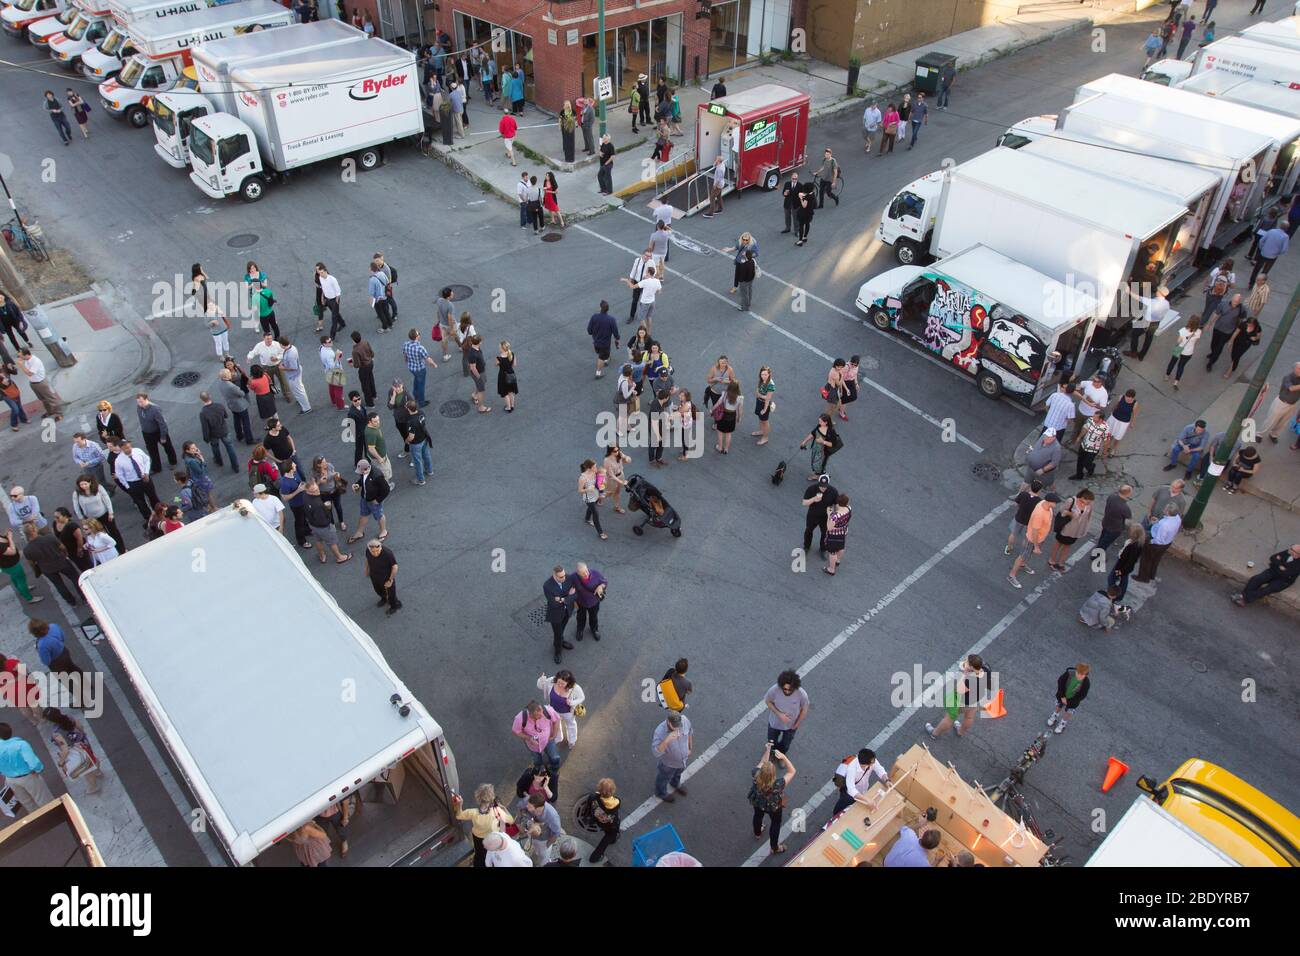 Group of people during Street Festival, Chicago, Illinois, USA Stock Photo